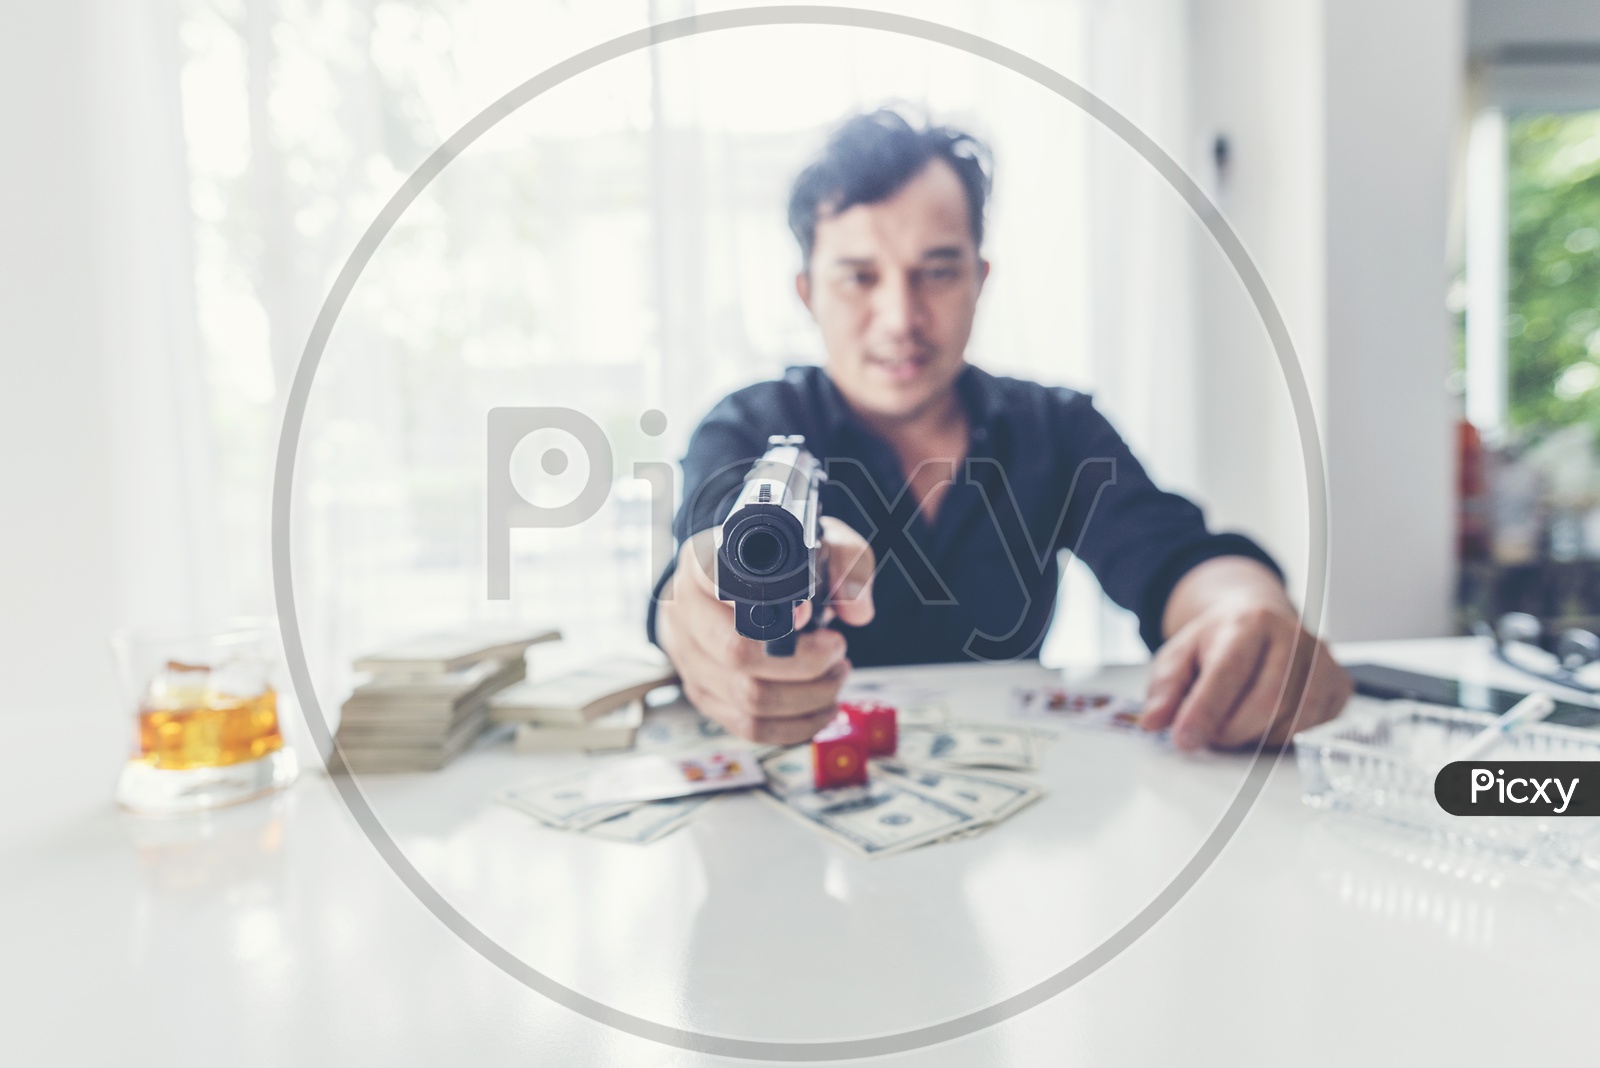 Gangster With Gun and Gambling Concept